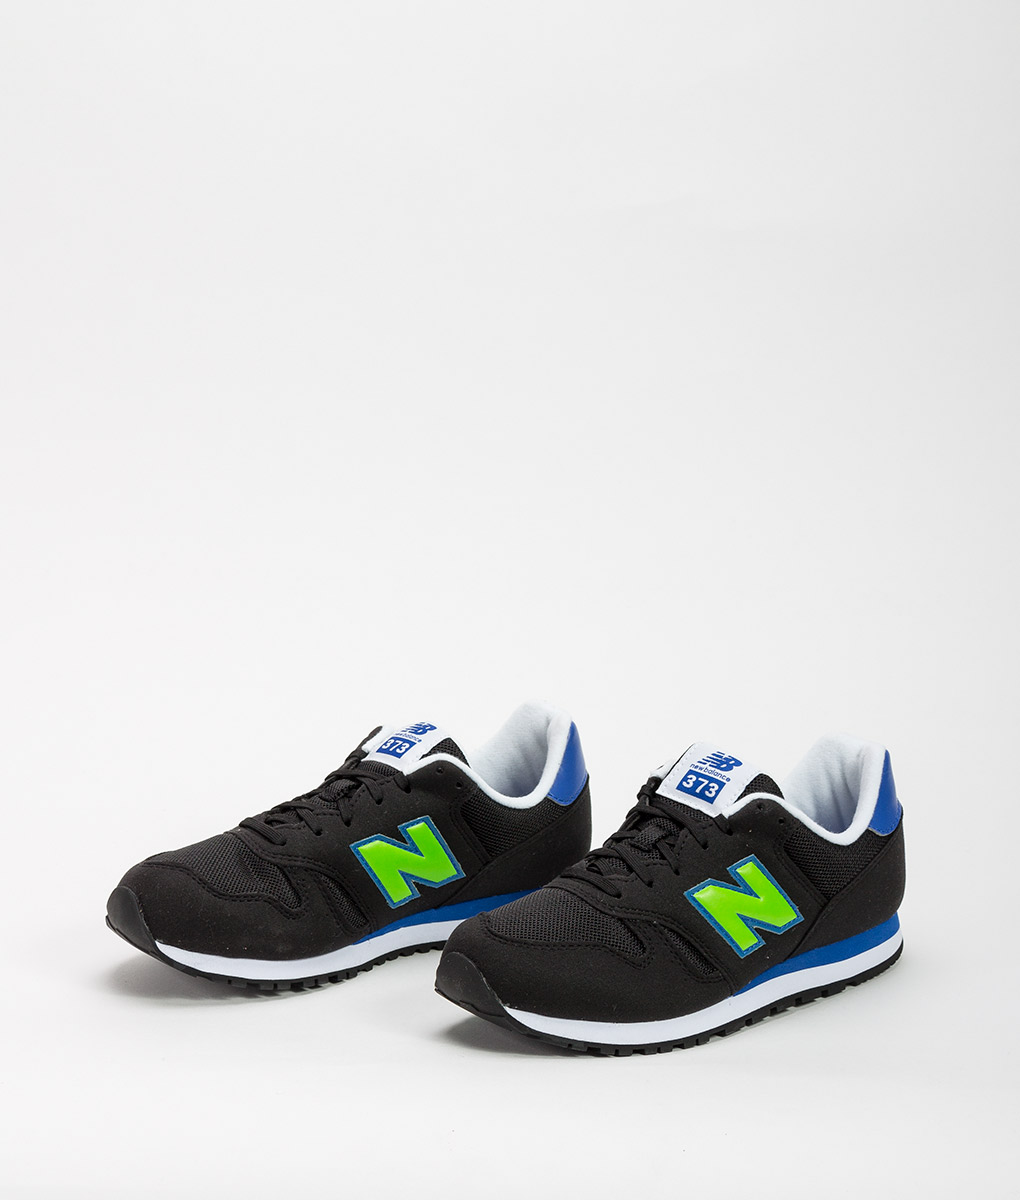 NEW Kids Shoes Navy 69.99 2 | T6/8